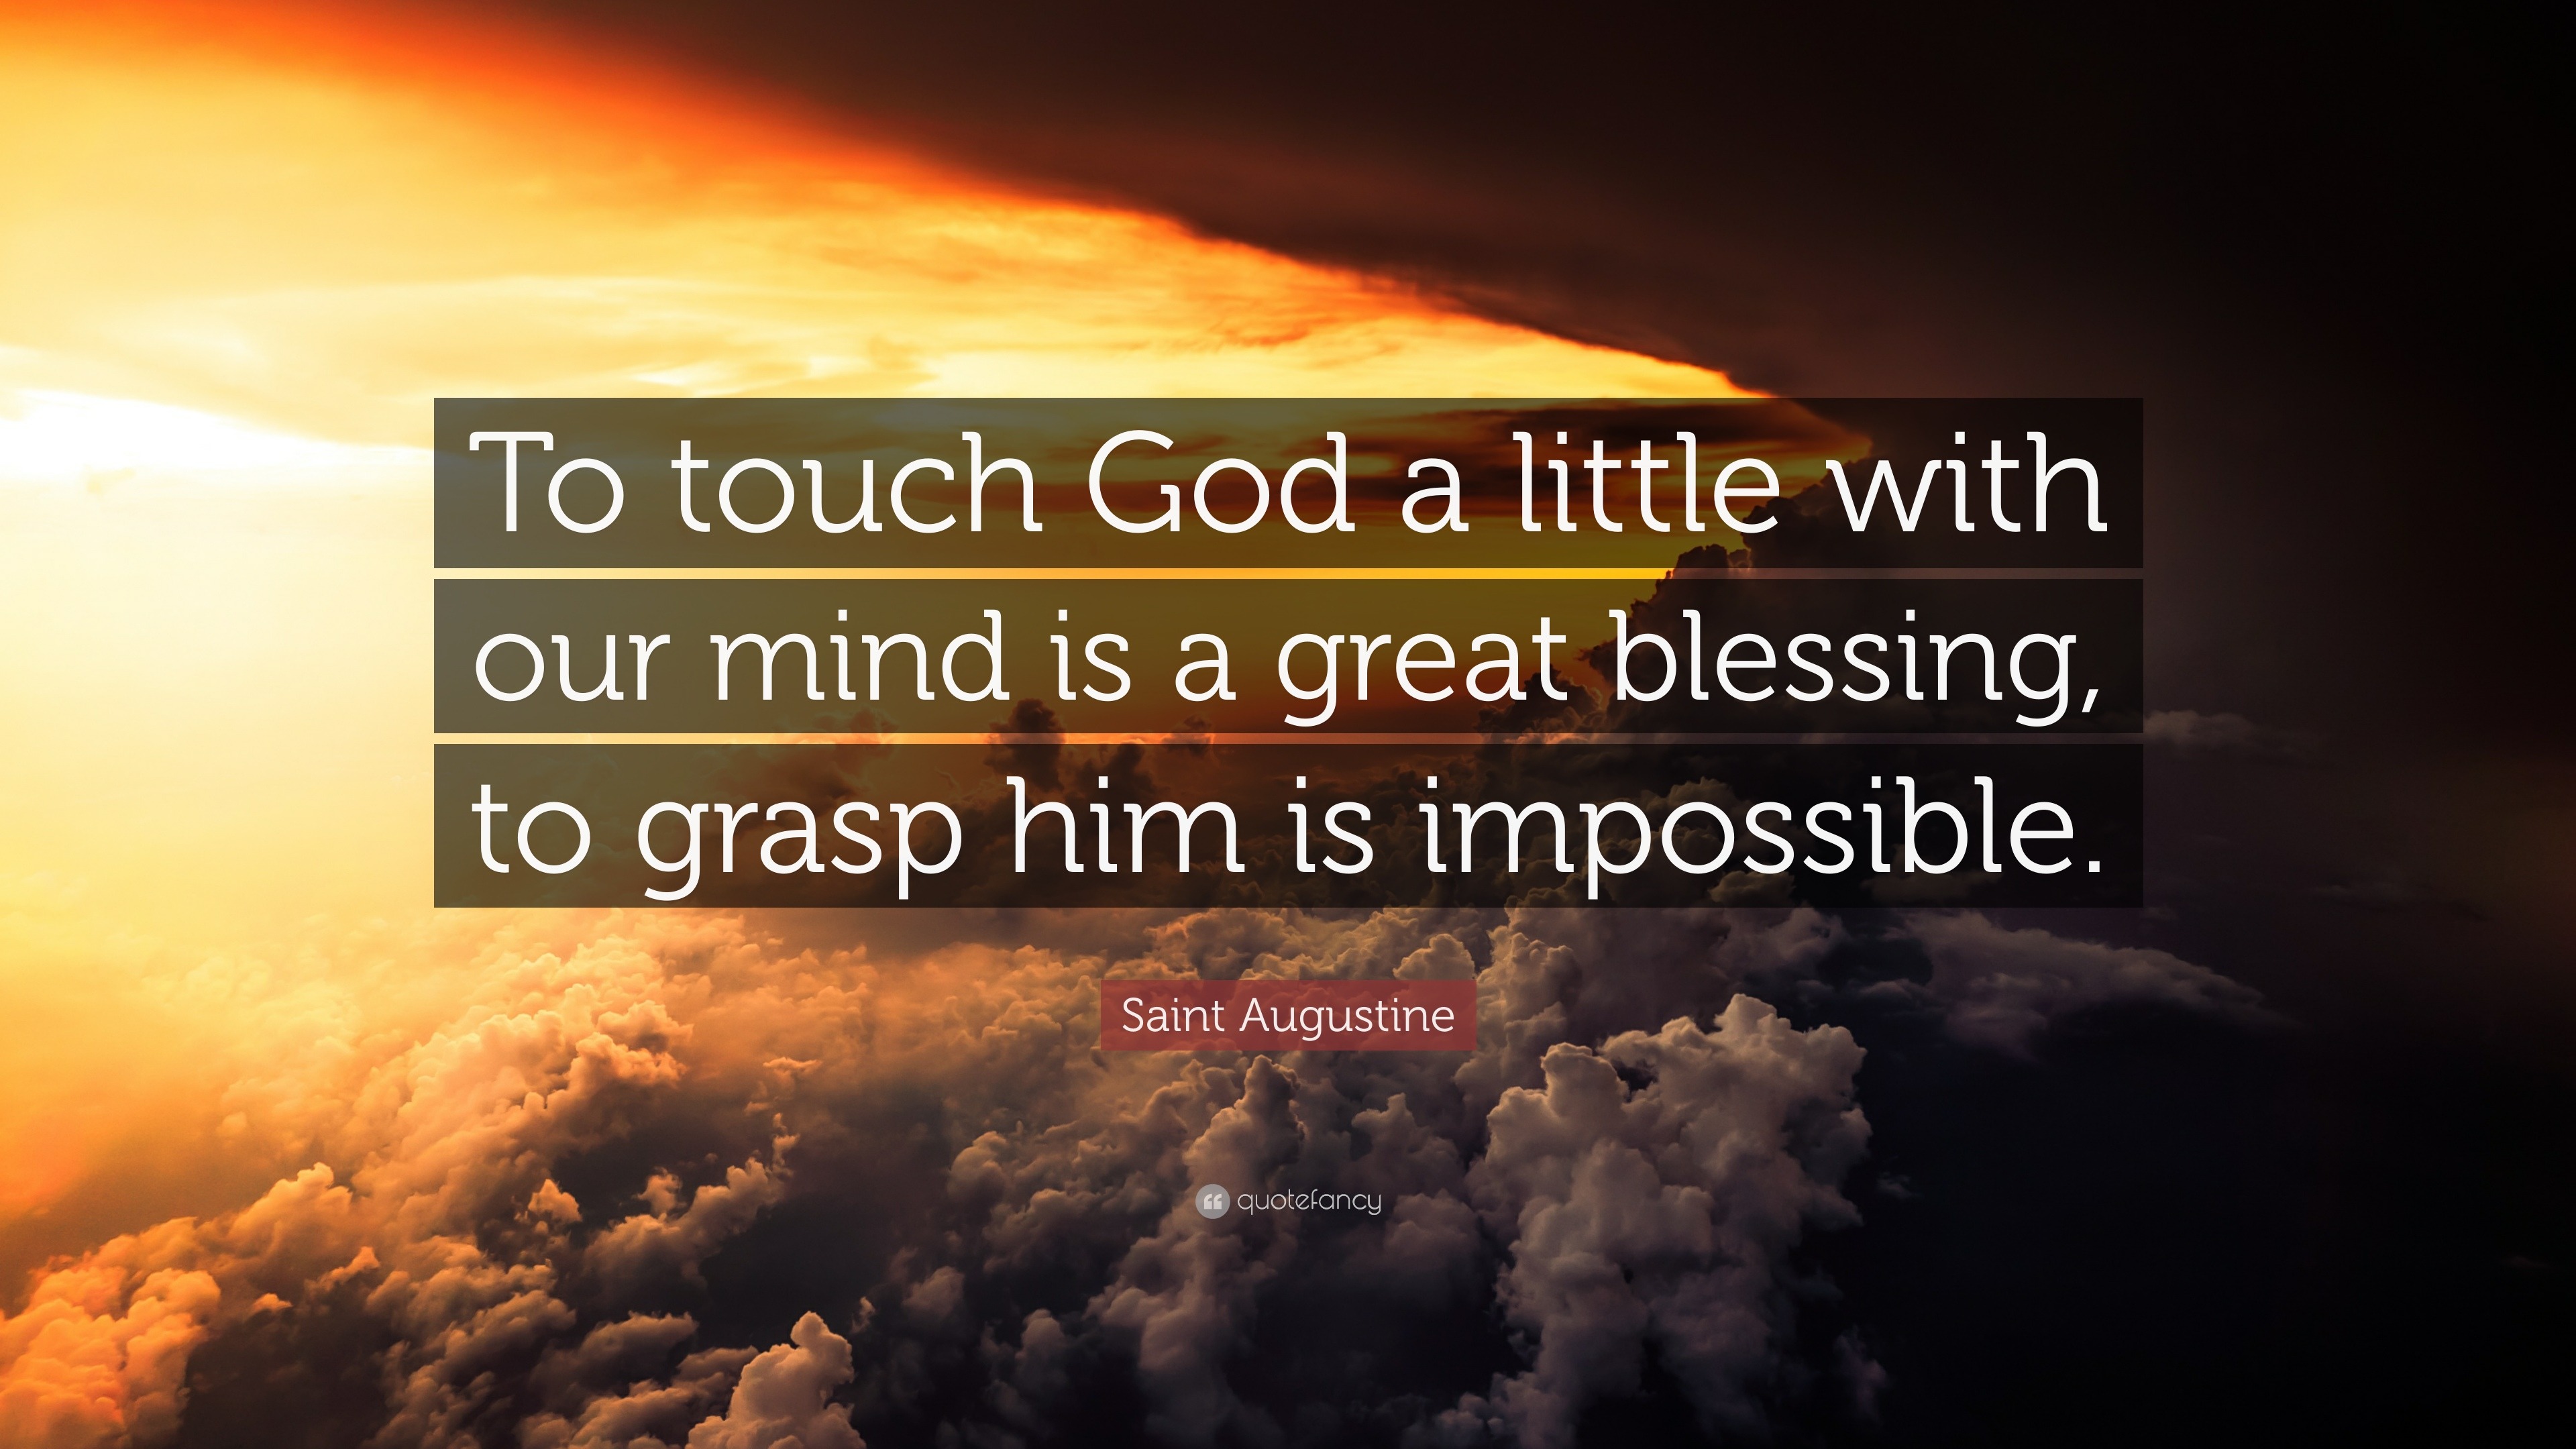 Saint Augustine Quote: "To touch God a little with our ...